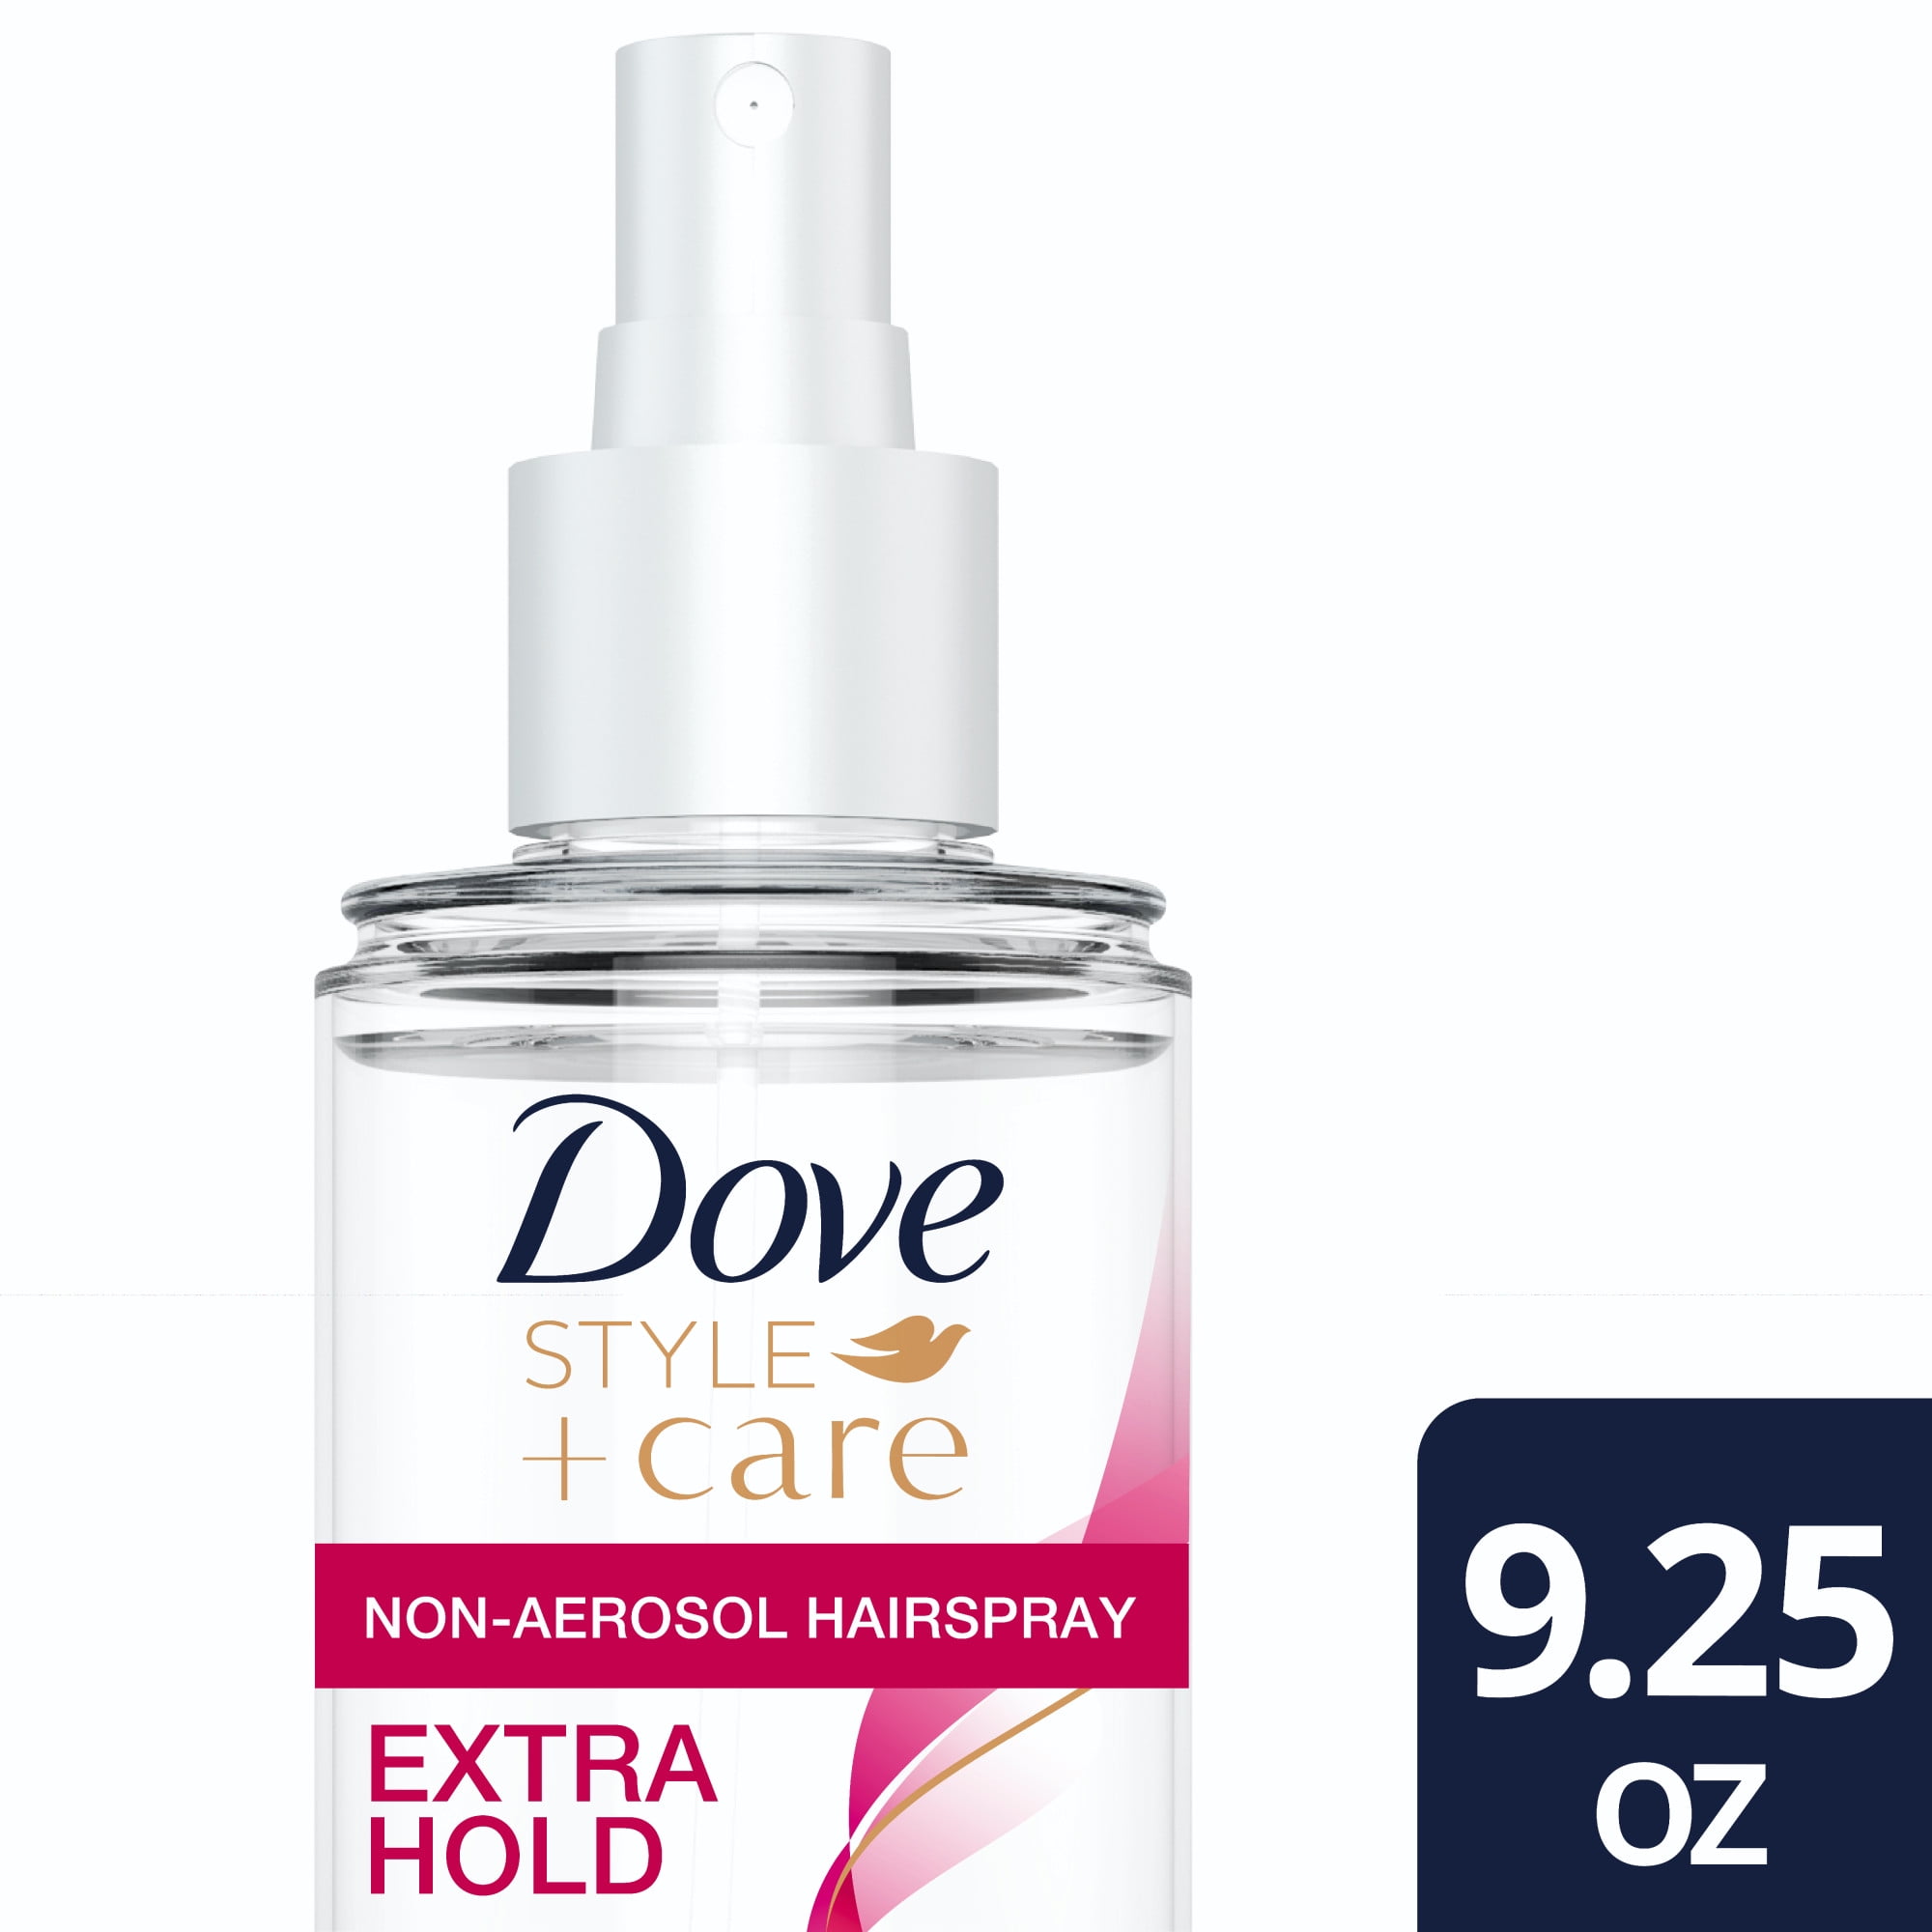 Dove Style+Care Extra Hold Hairspray,  oz 